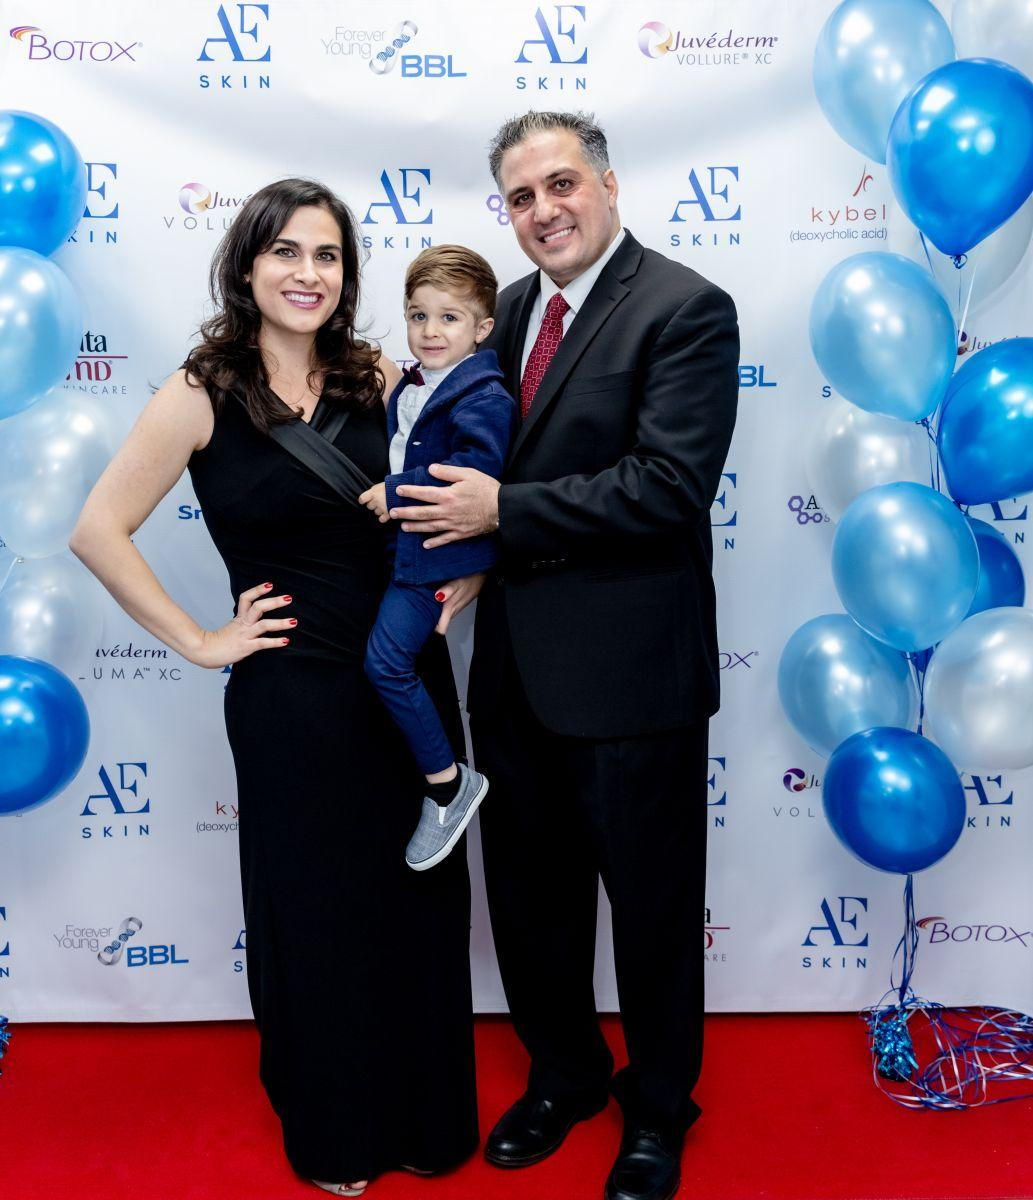 Dr. Alex and family on the red carpet